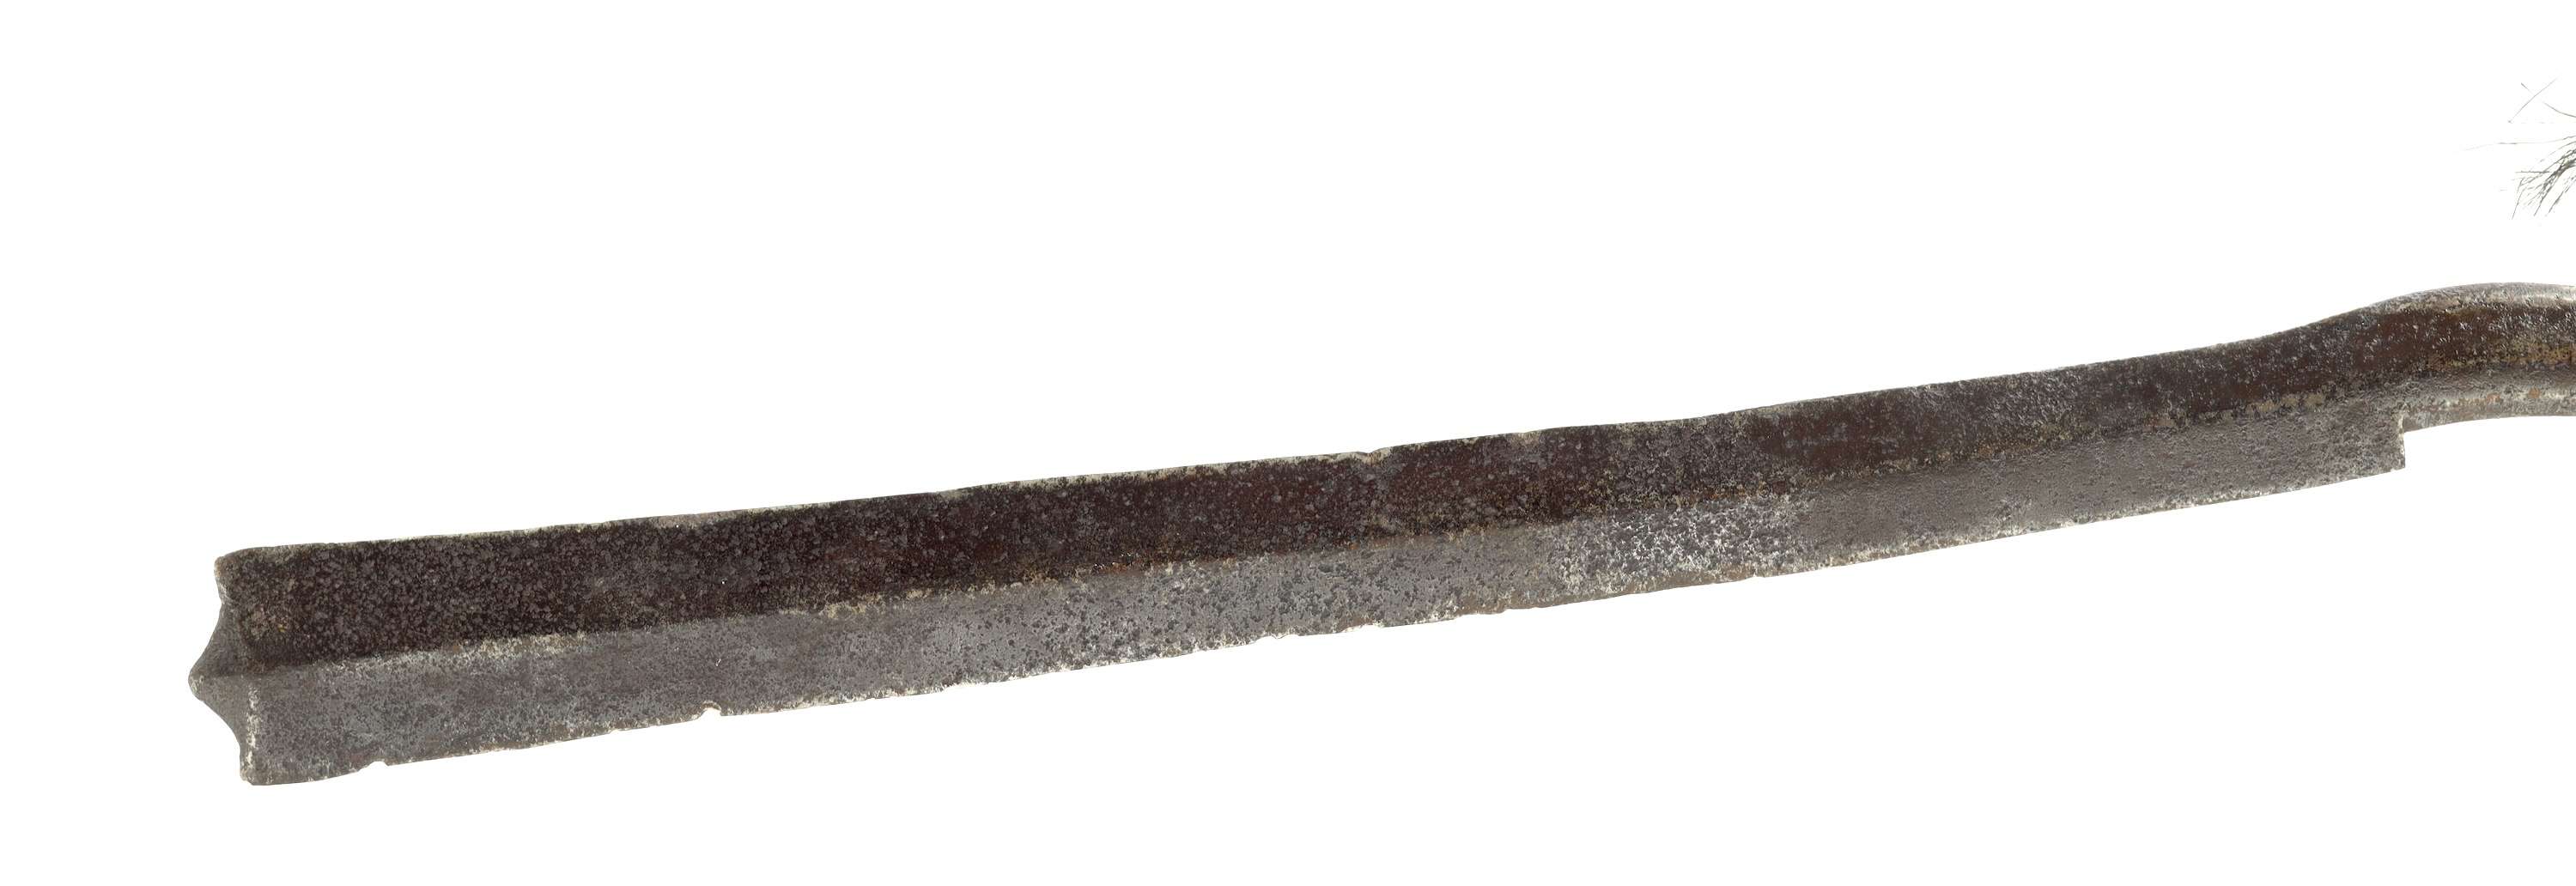 A milam sword of the Garo headhunters of Assam